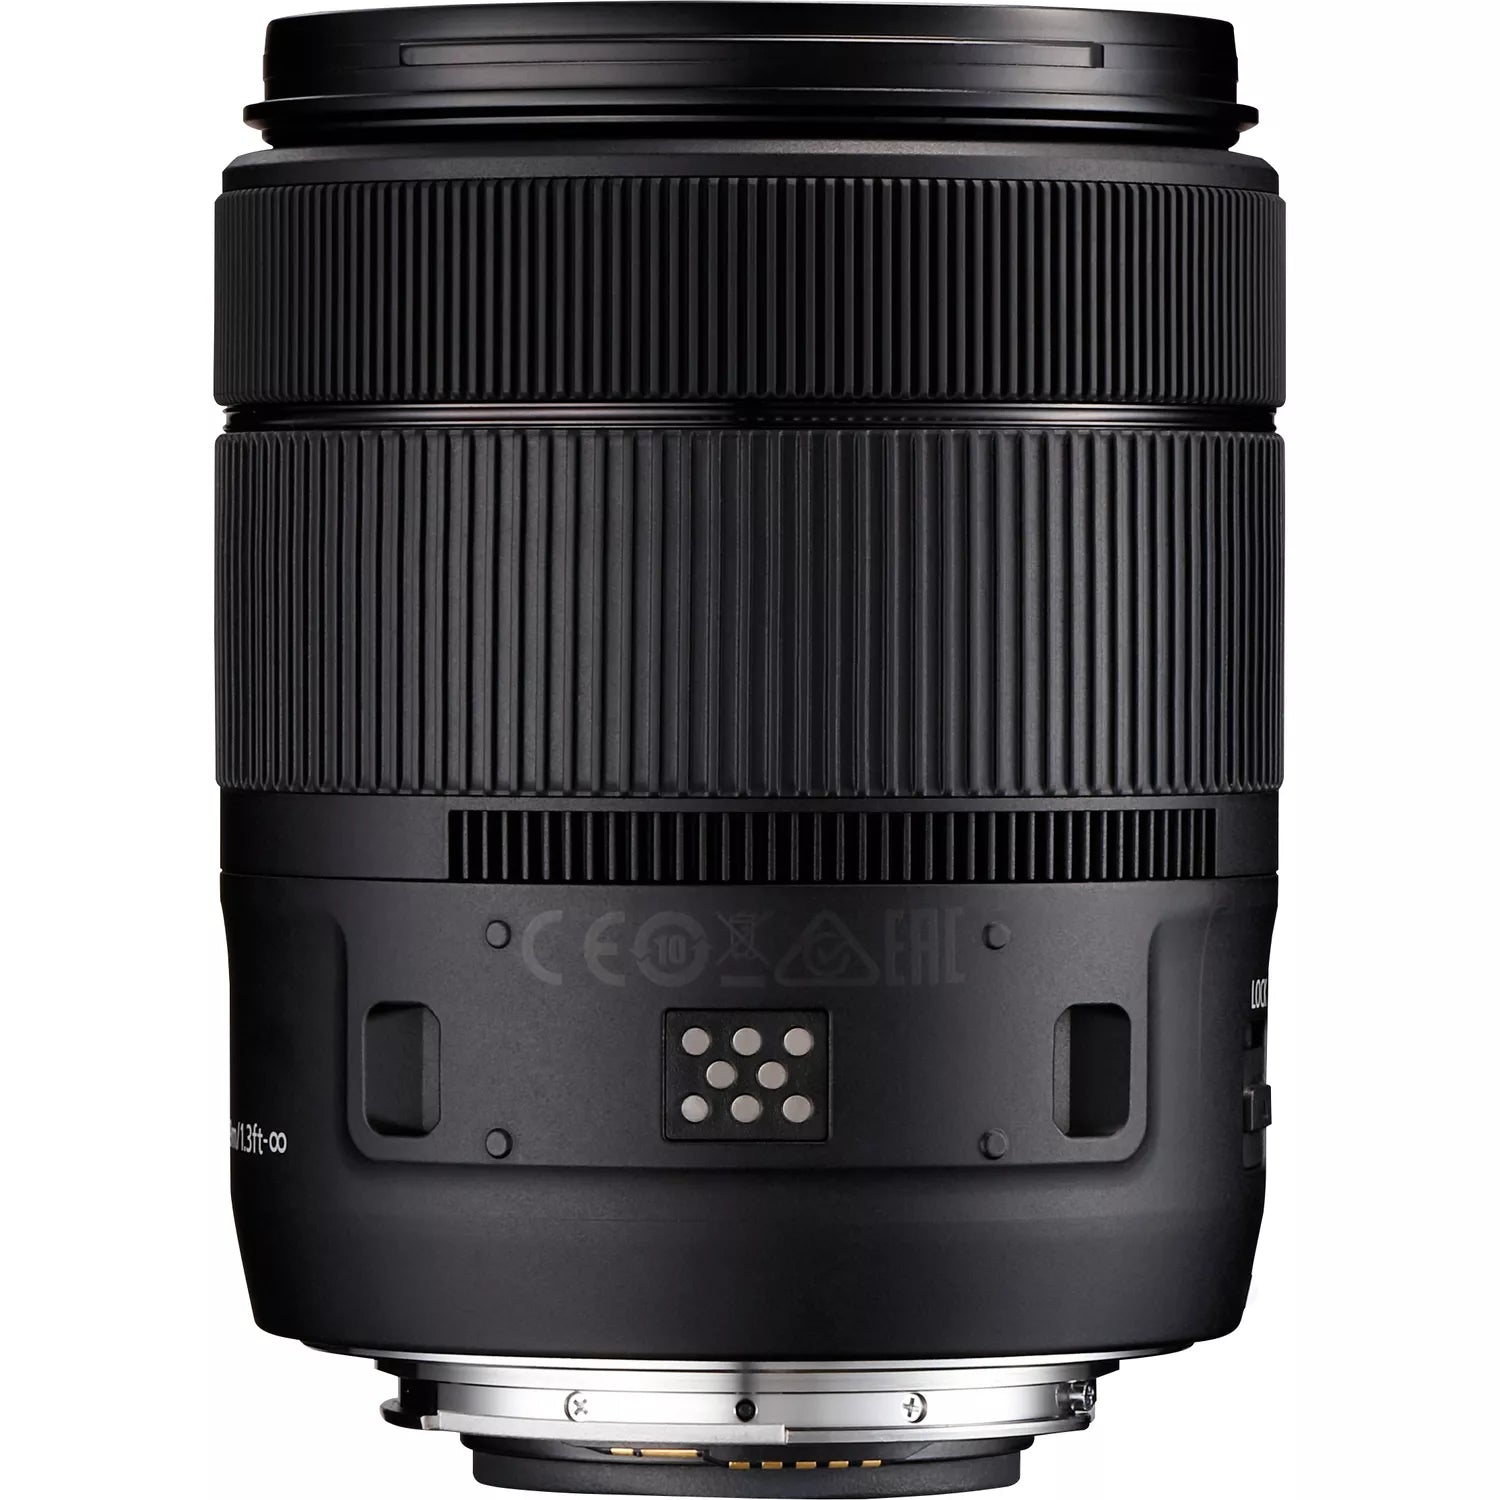 Canon 18-135MM EF-S f3.5-5.6 IS USM Lens - Product Photo 4